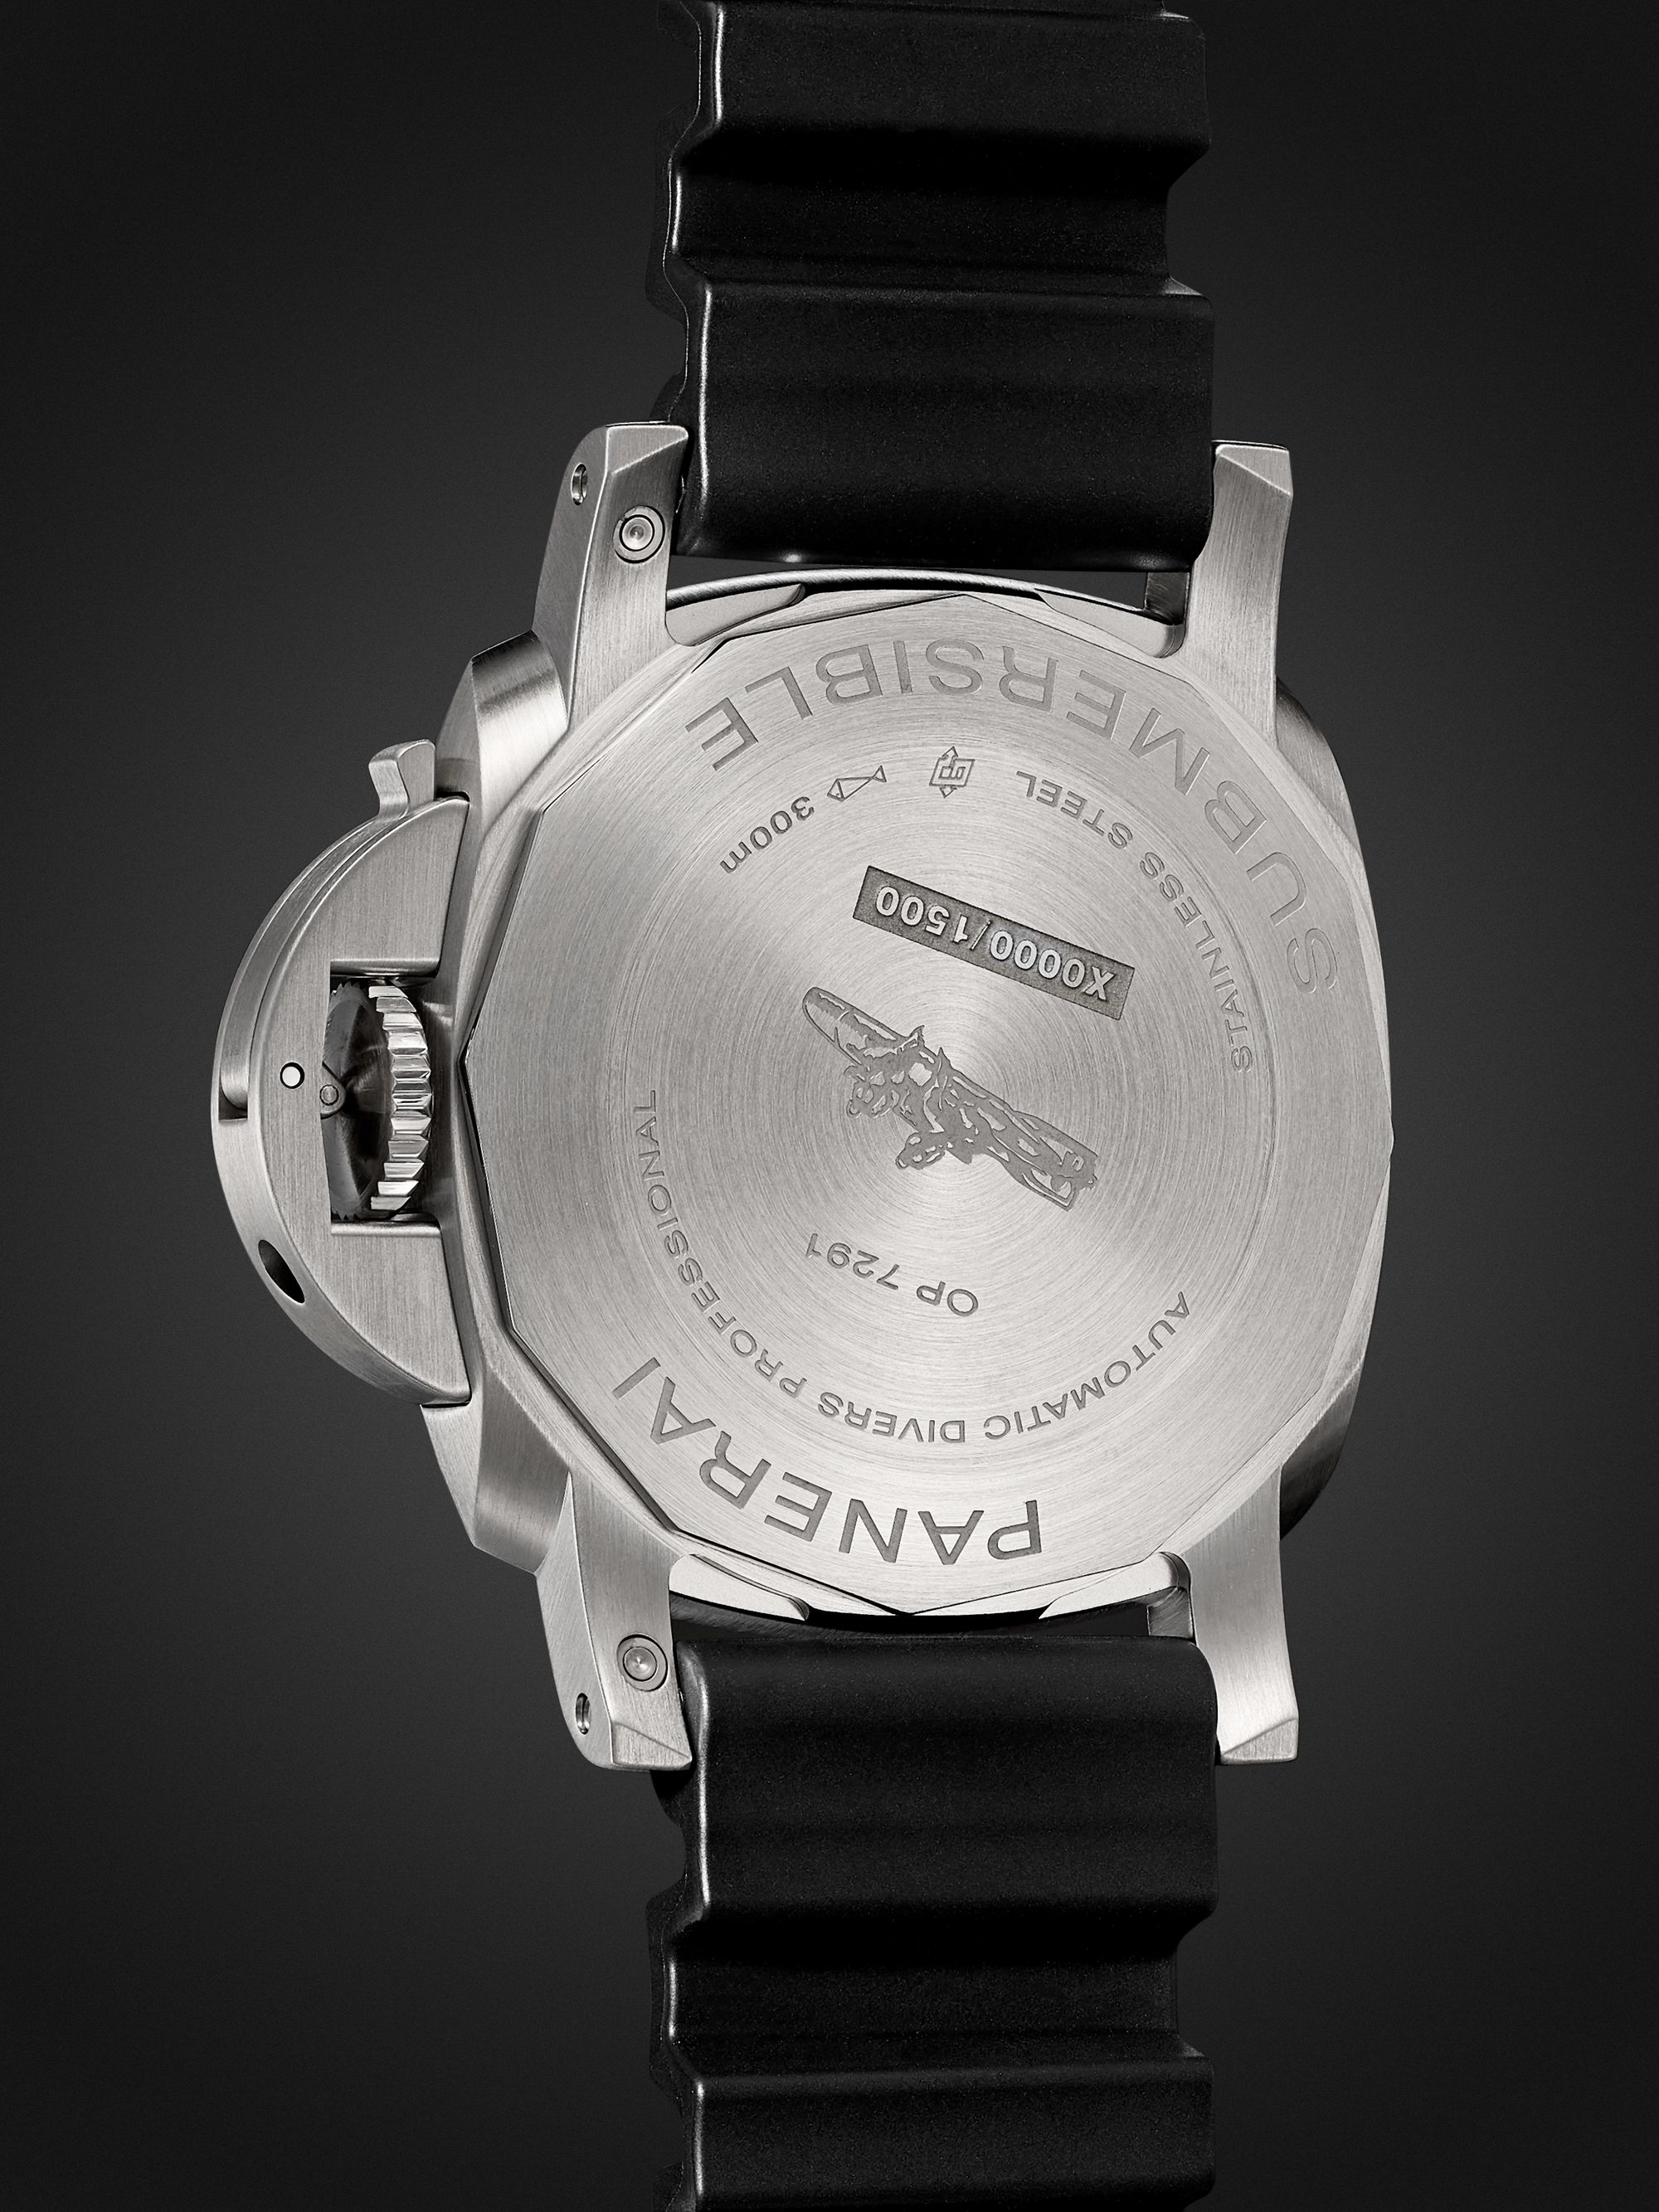 PANERAI Submersible Automatic 42mm Stainless Steel and Rubber Watch, Ref. No. PAM00973